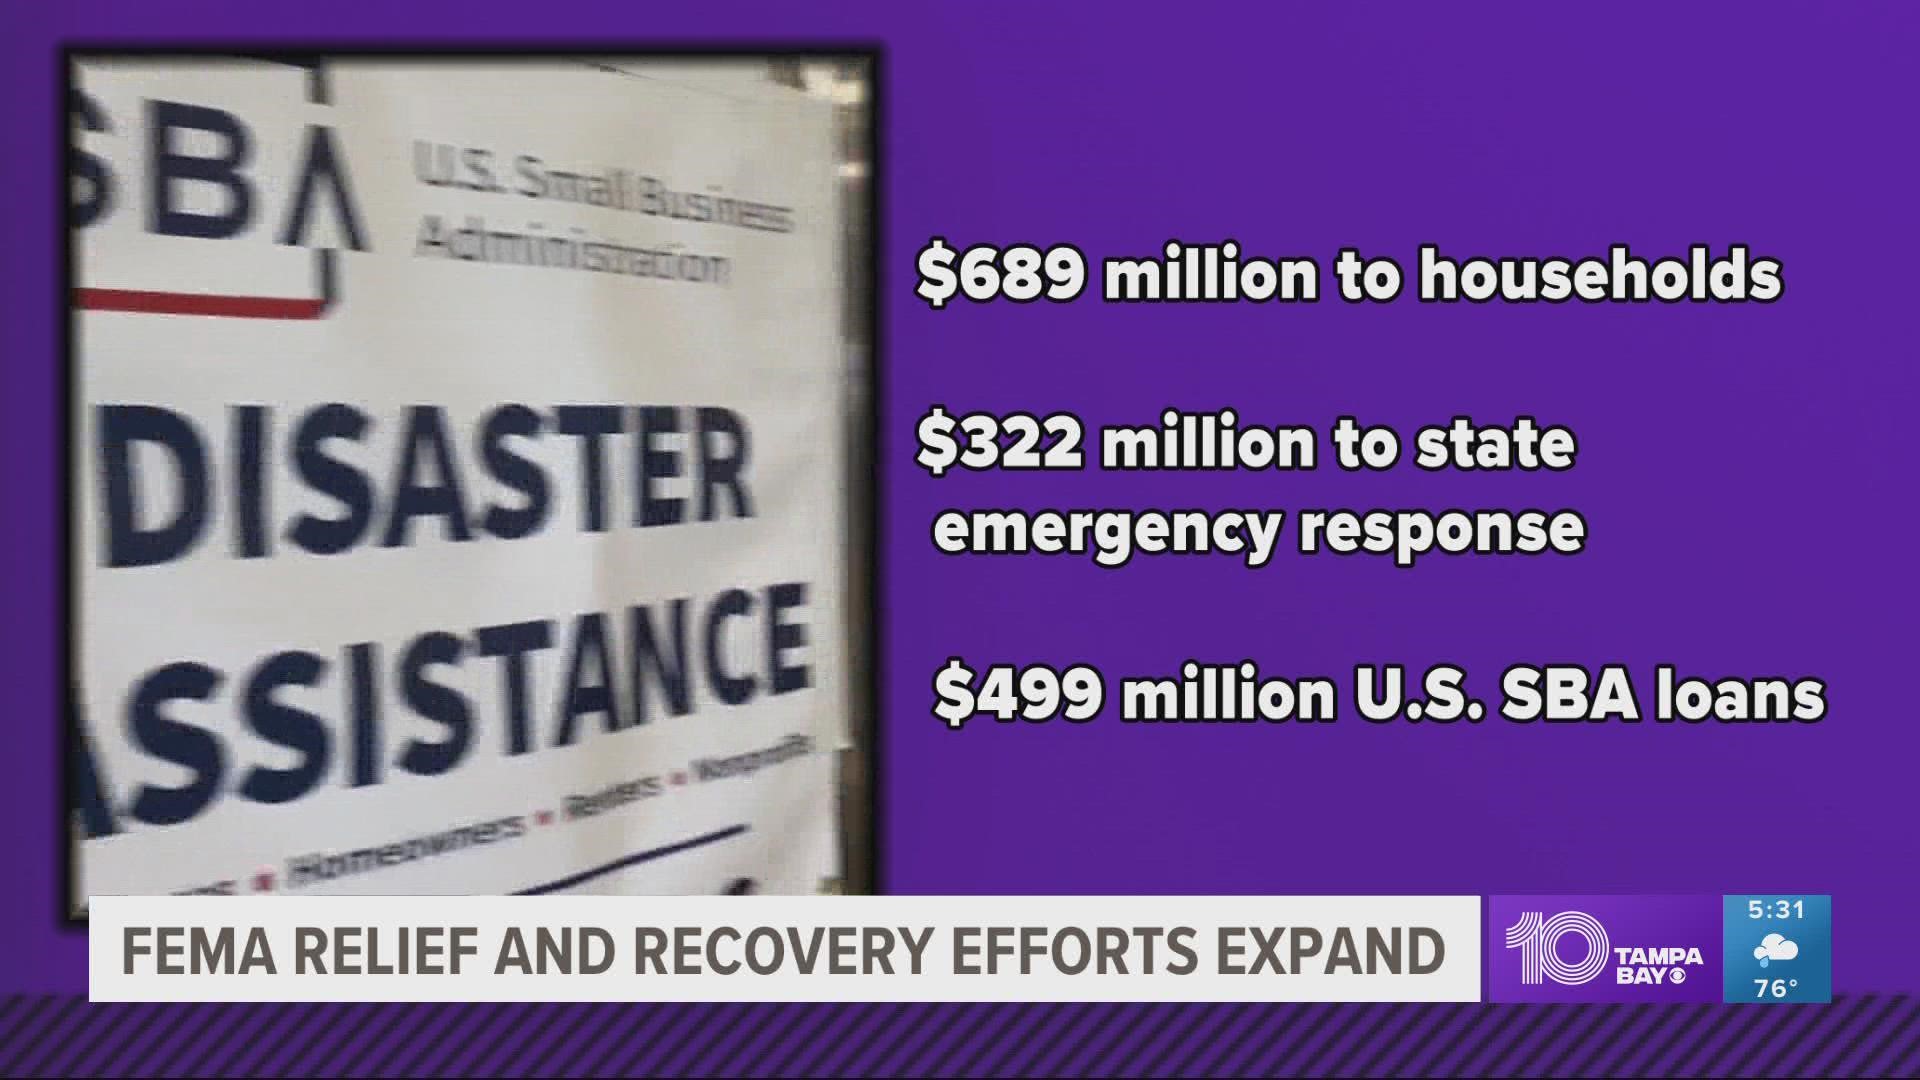 Florida families have received $1.79 billion dollars in disaster grants, loans and flood insurance payments